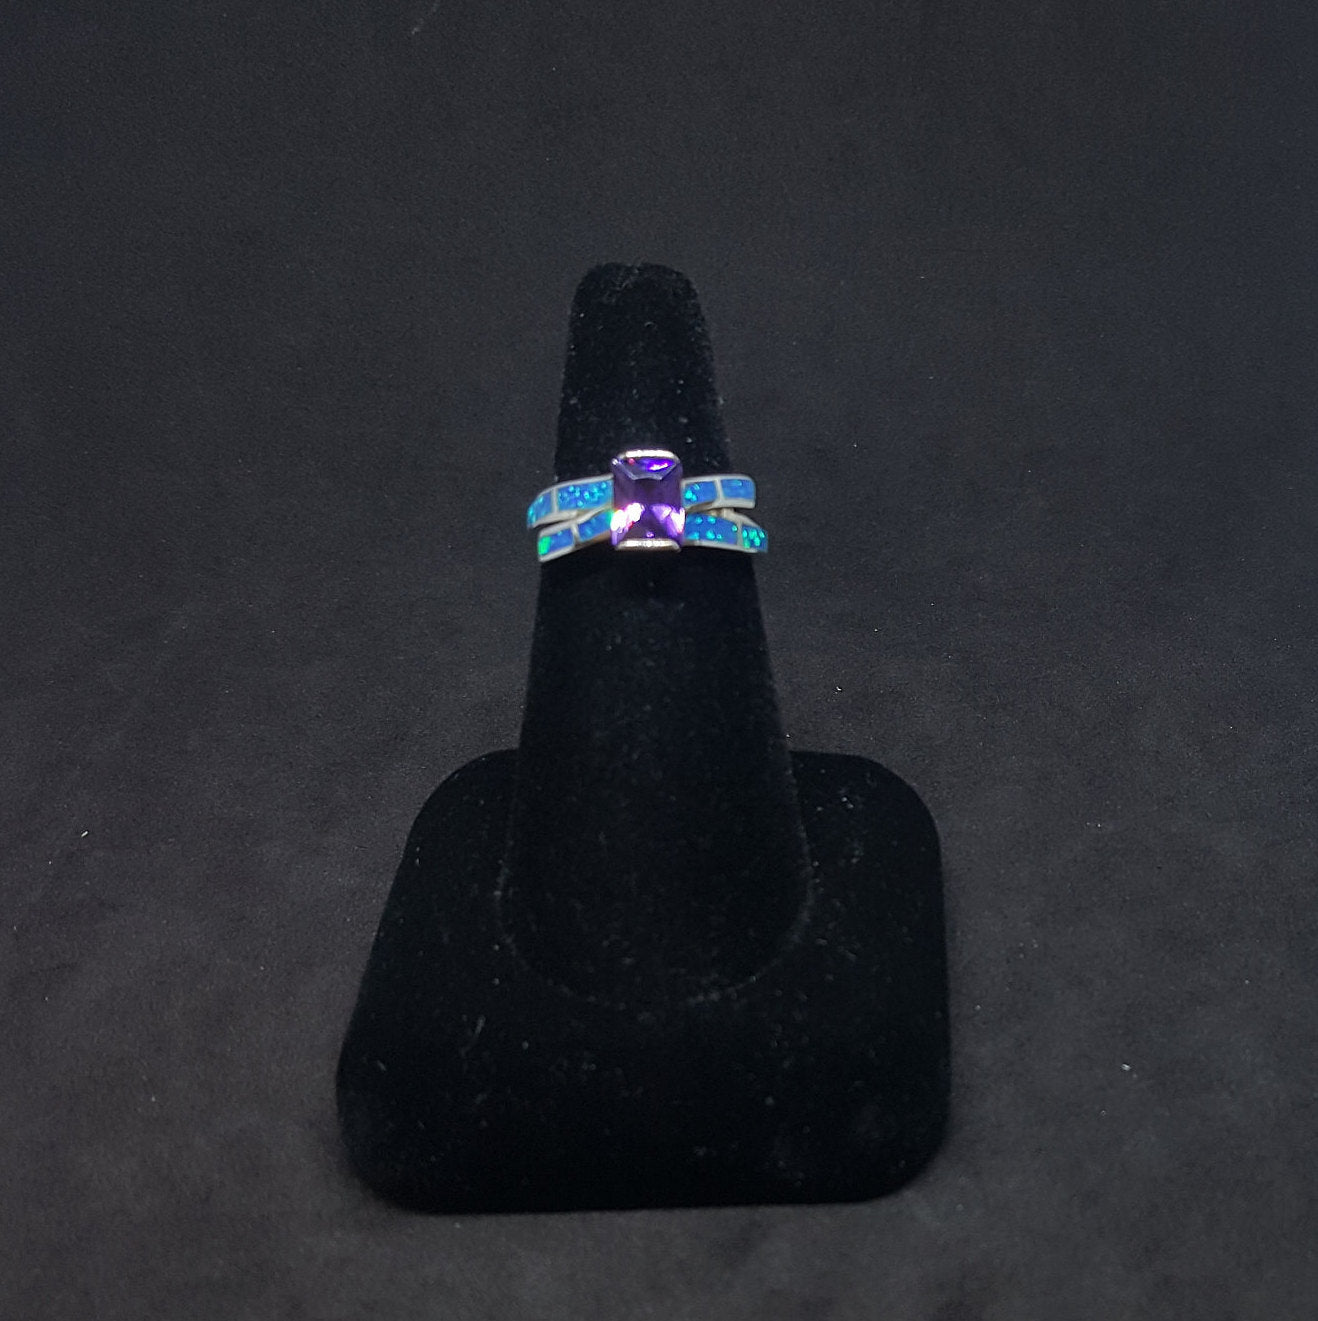 Size 8 - Tied up rectangle Amethyst Blue opal Sterling silver ring